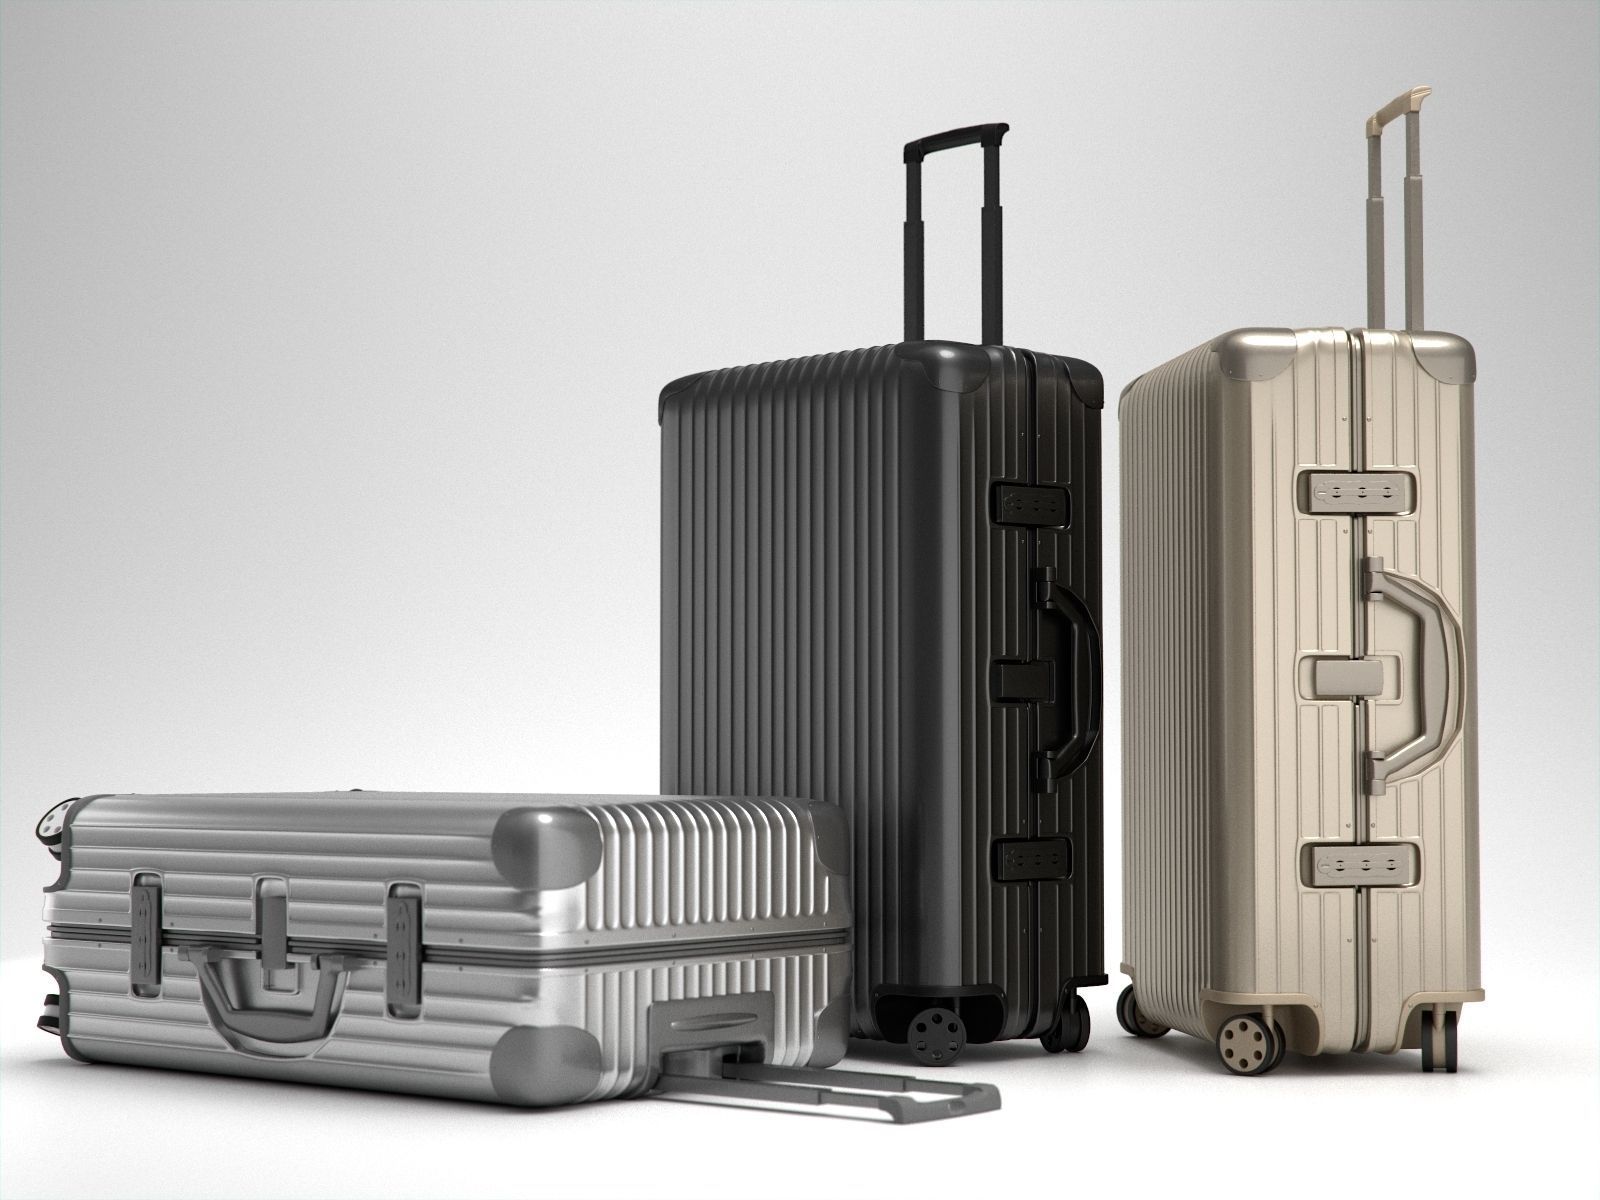 luggage 3d model free download